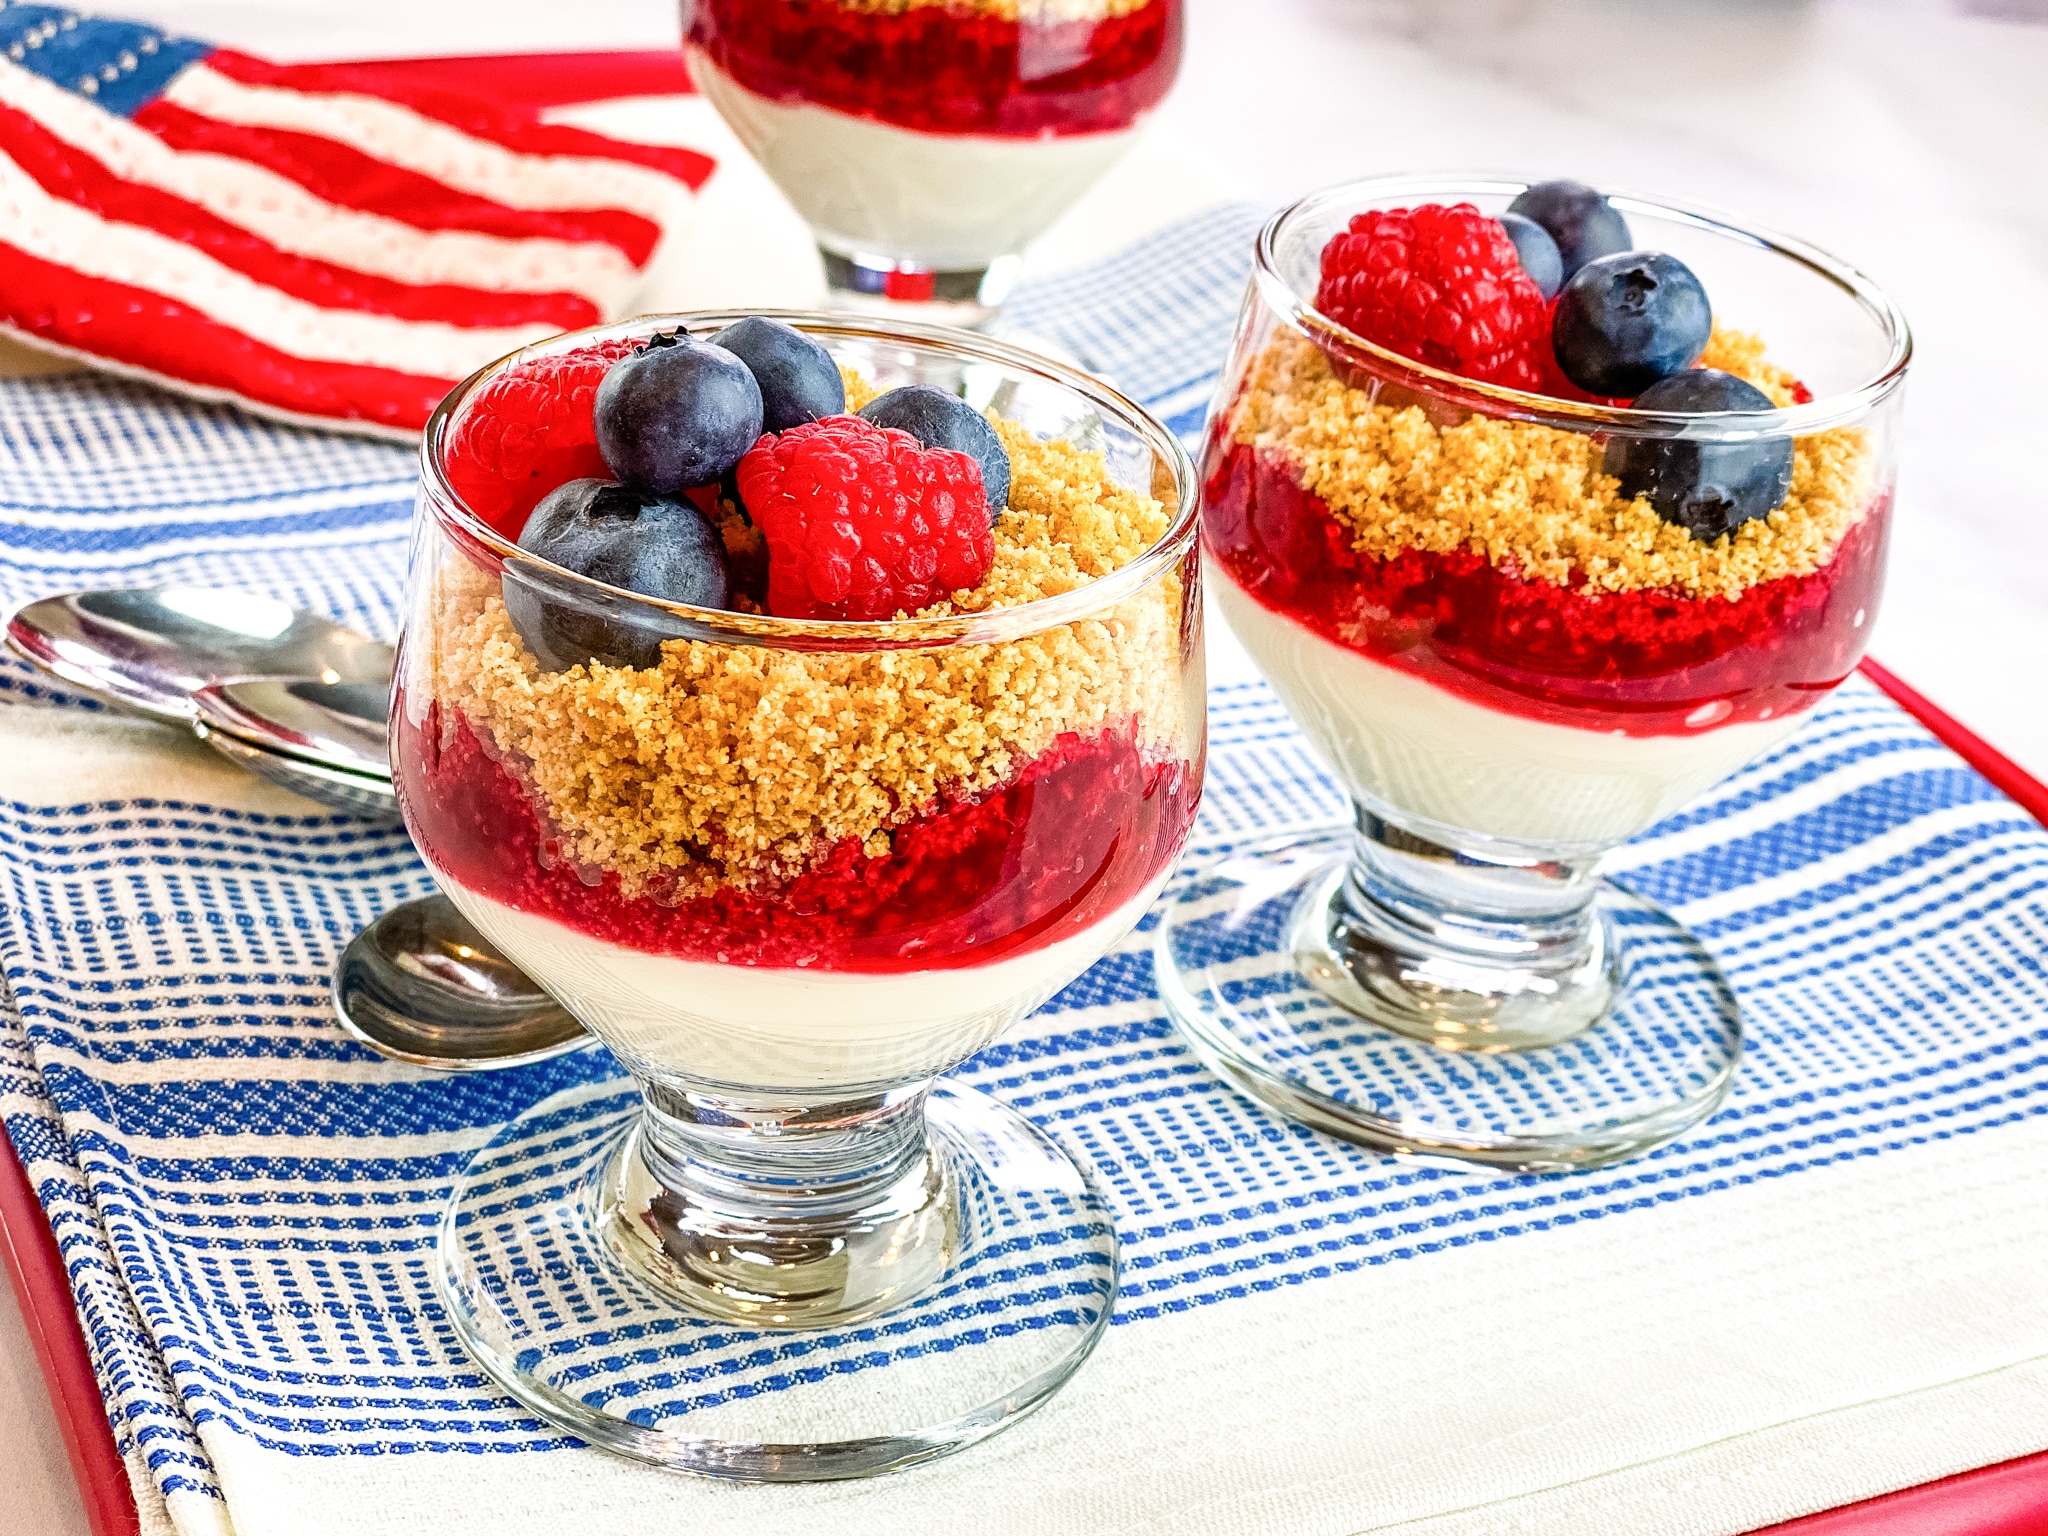 mini cheesecakes are in small glass serving bowls topped with granola and berries